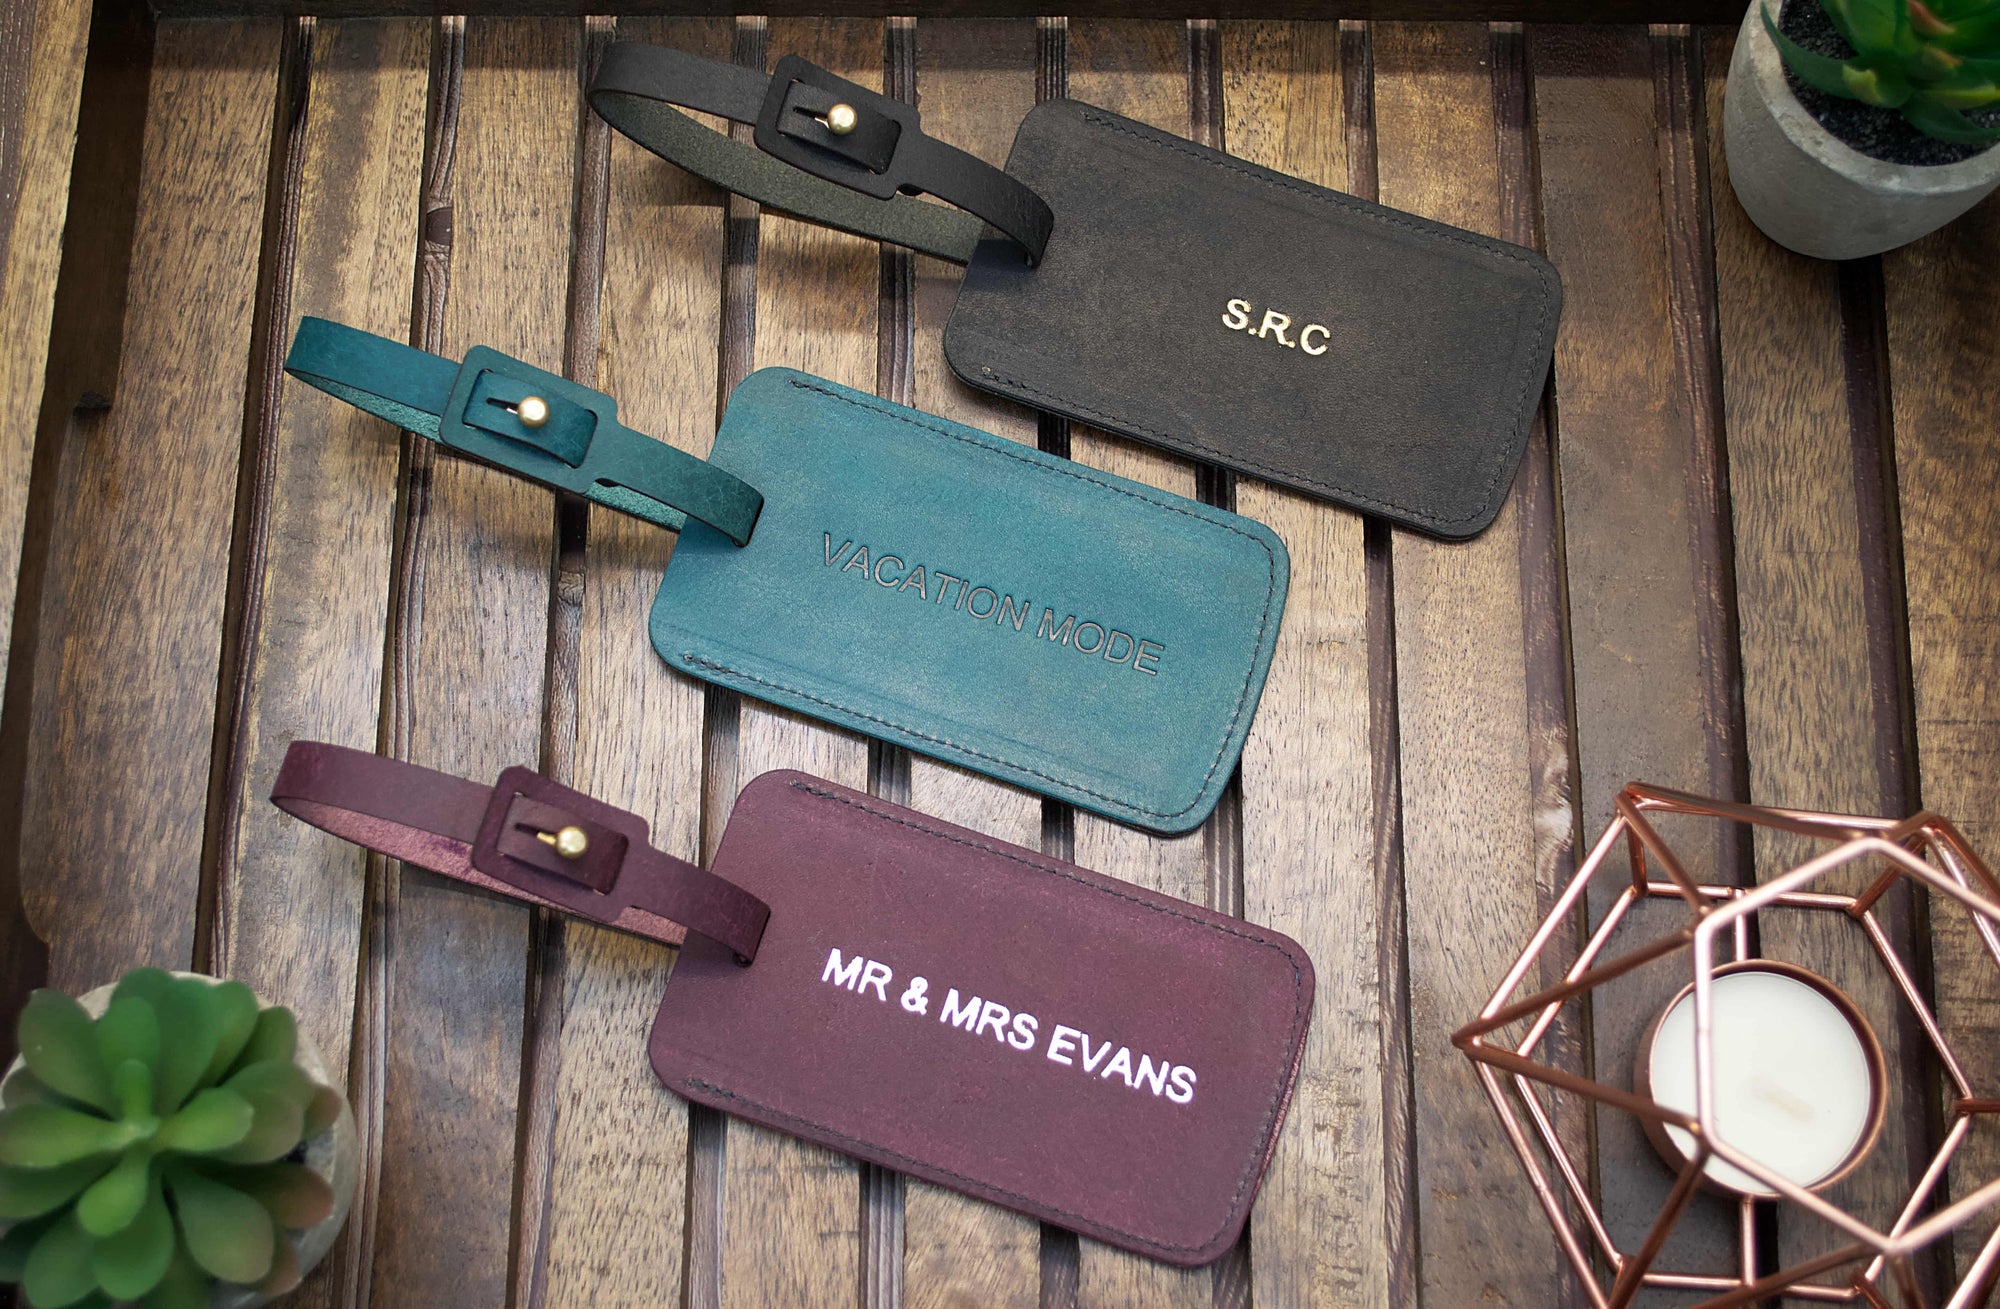 Personalised Leather Luggage Tag